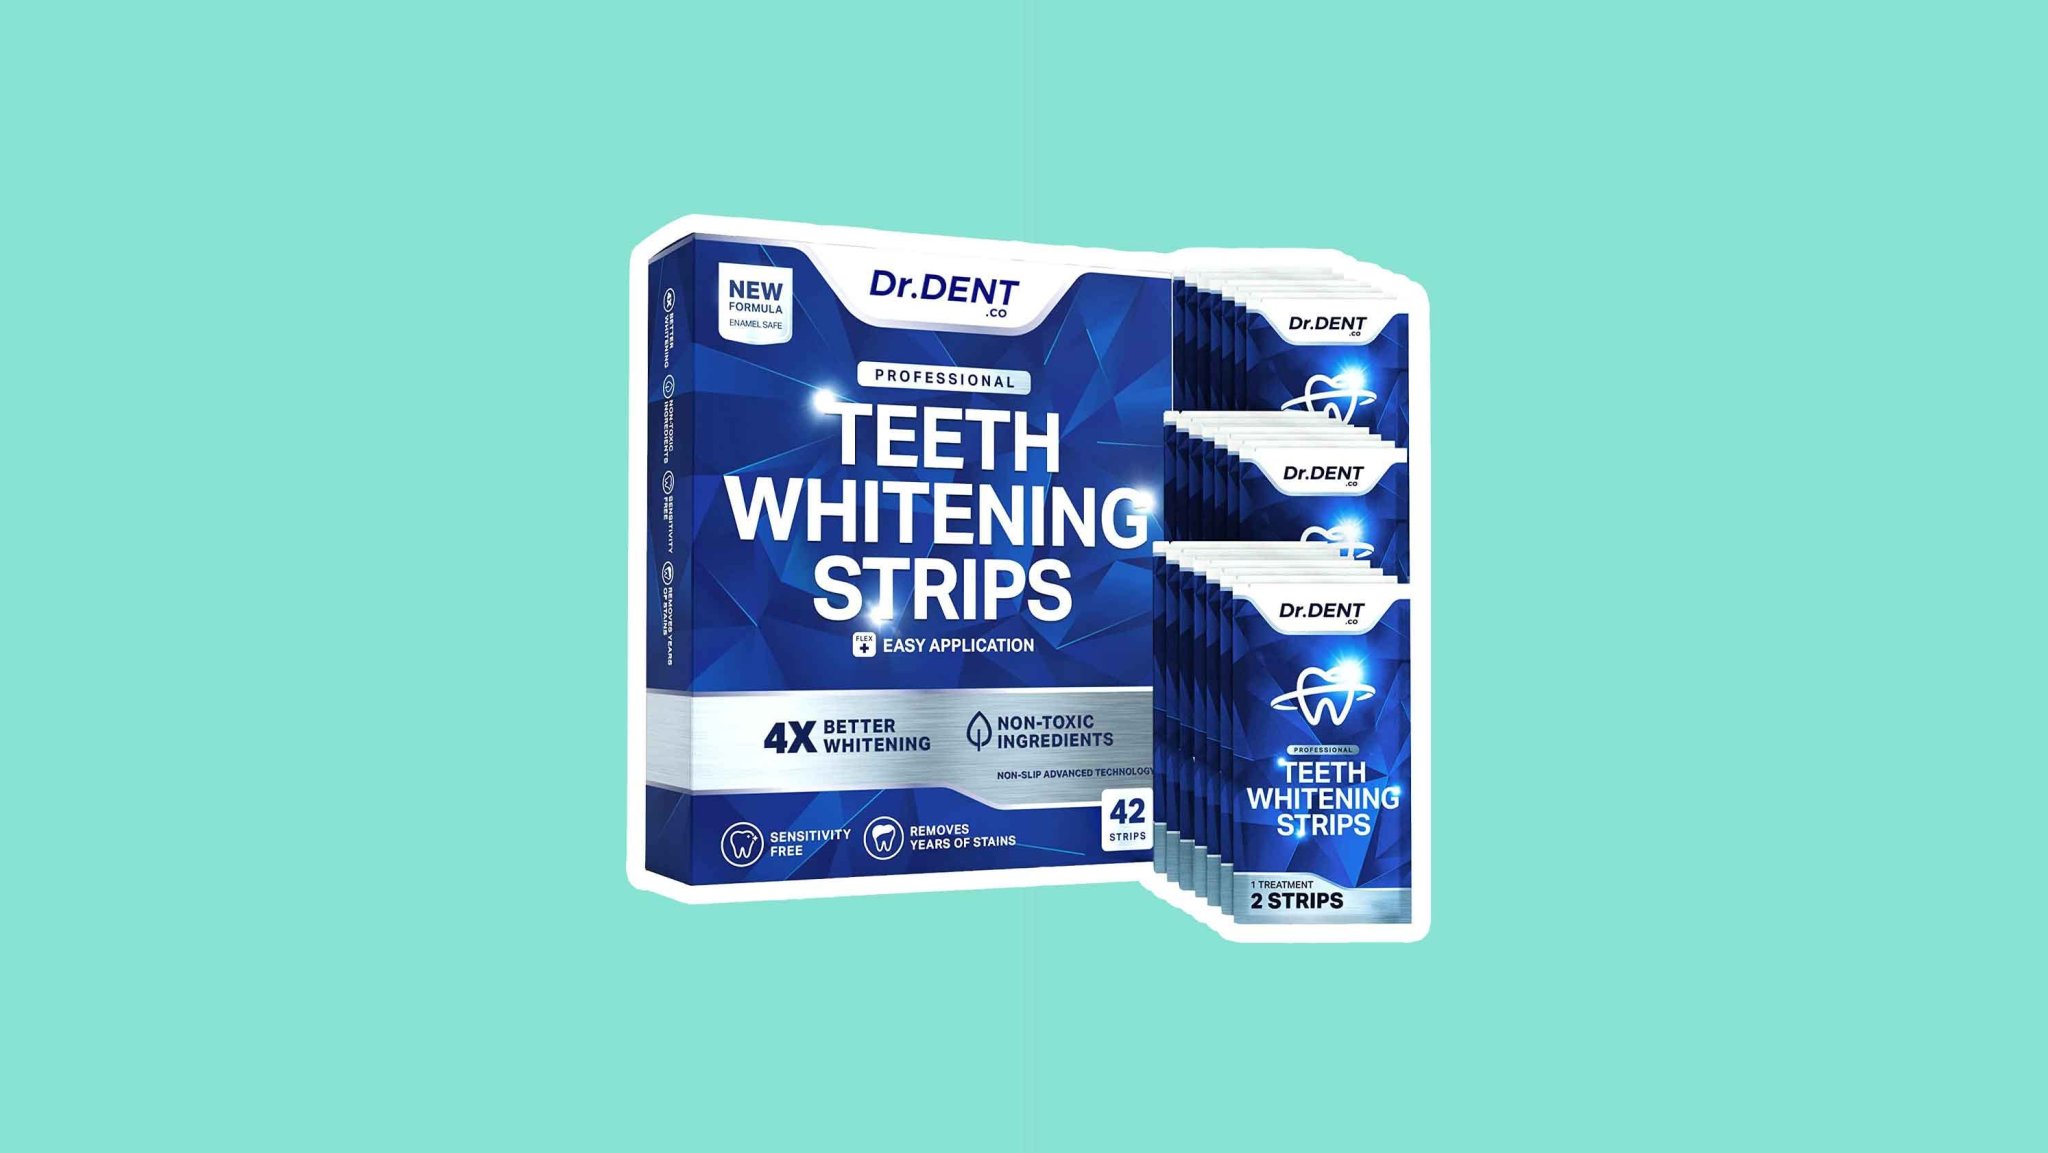 Get a bright back-to-school smile with sparkly savings on top-rated teeth whitening strips